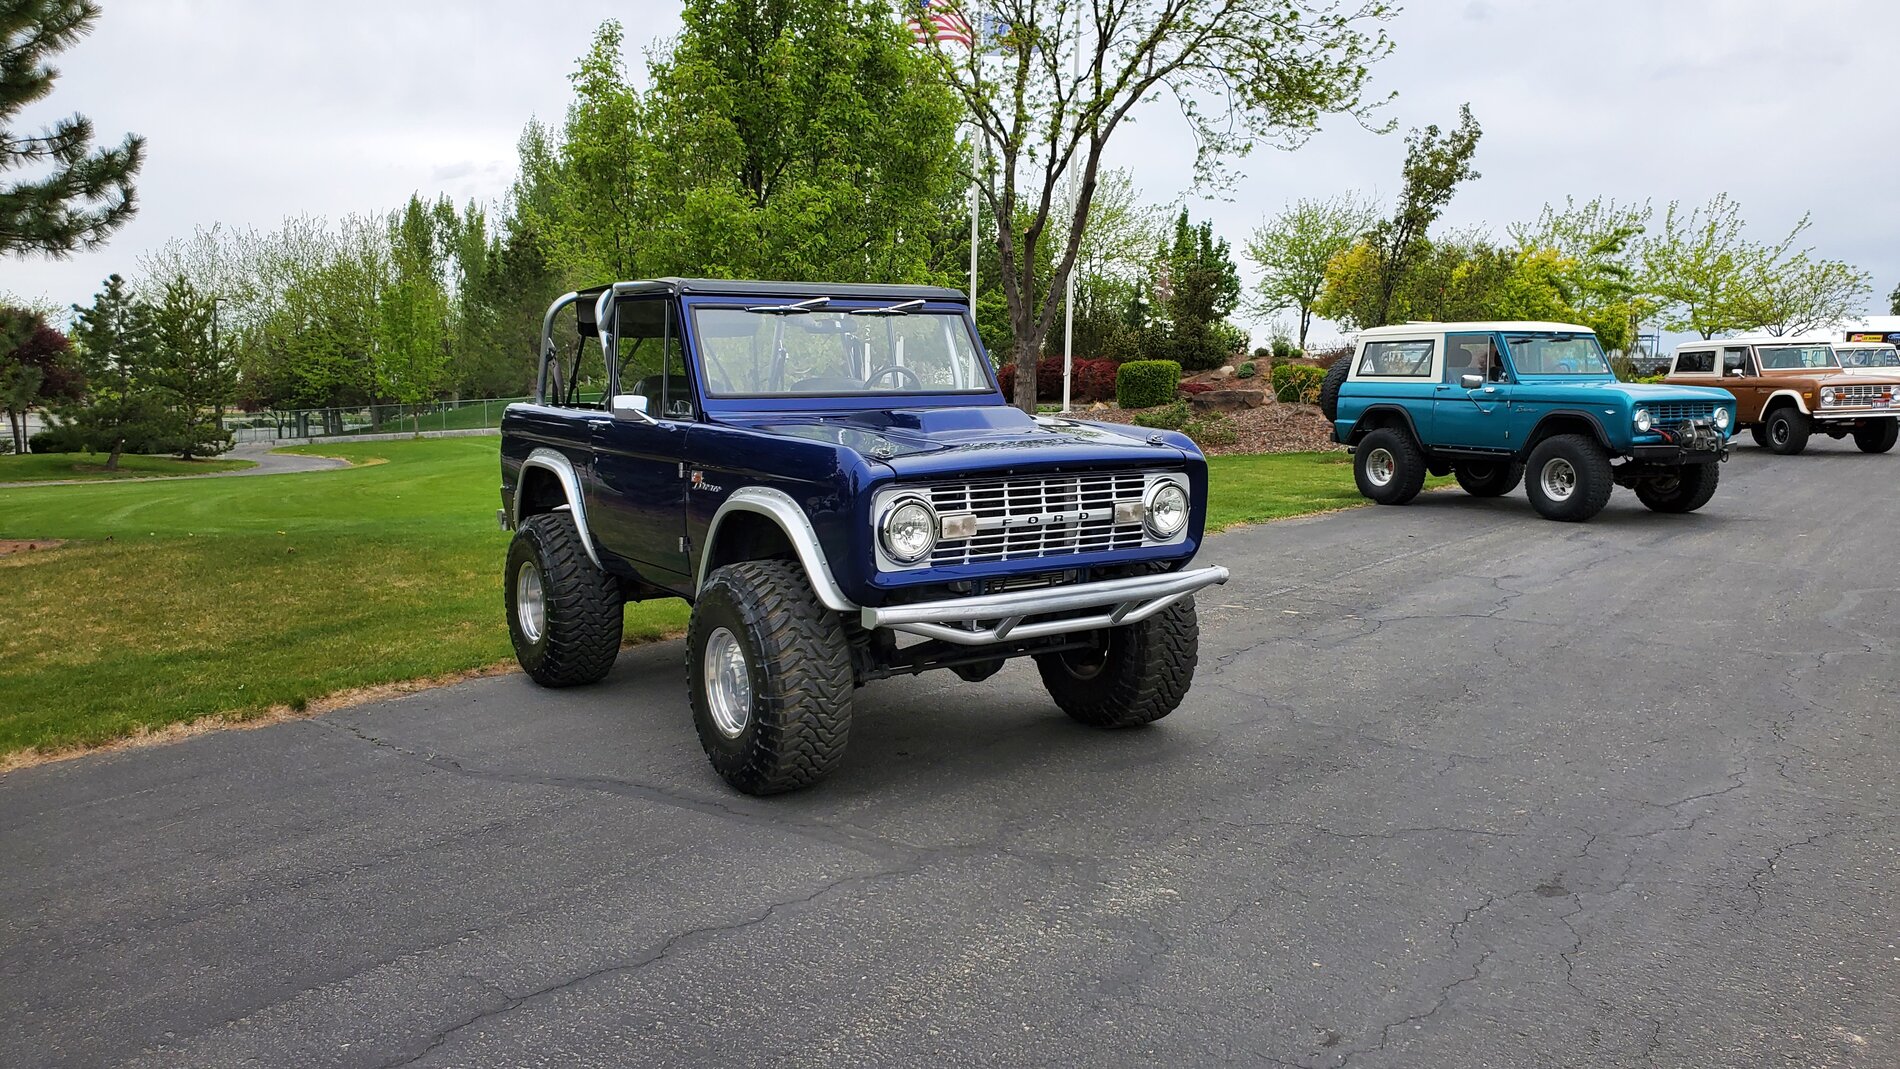 Ford Bronco Idaho Bronco show if you can call it that 20210501_115429